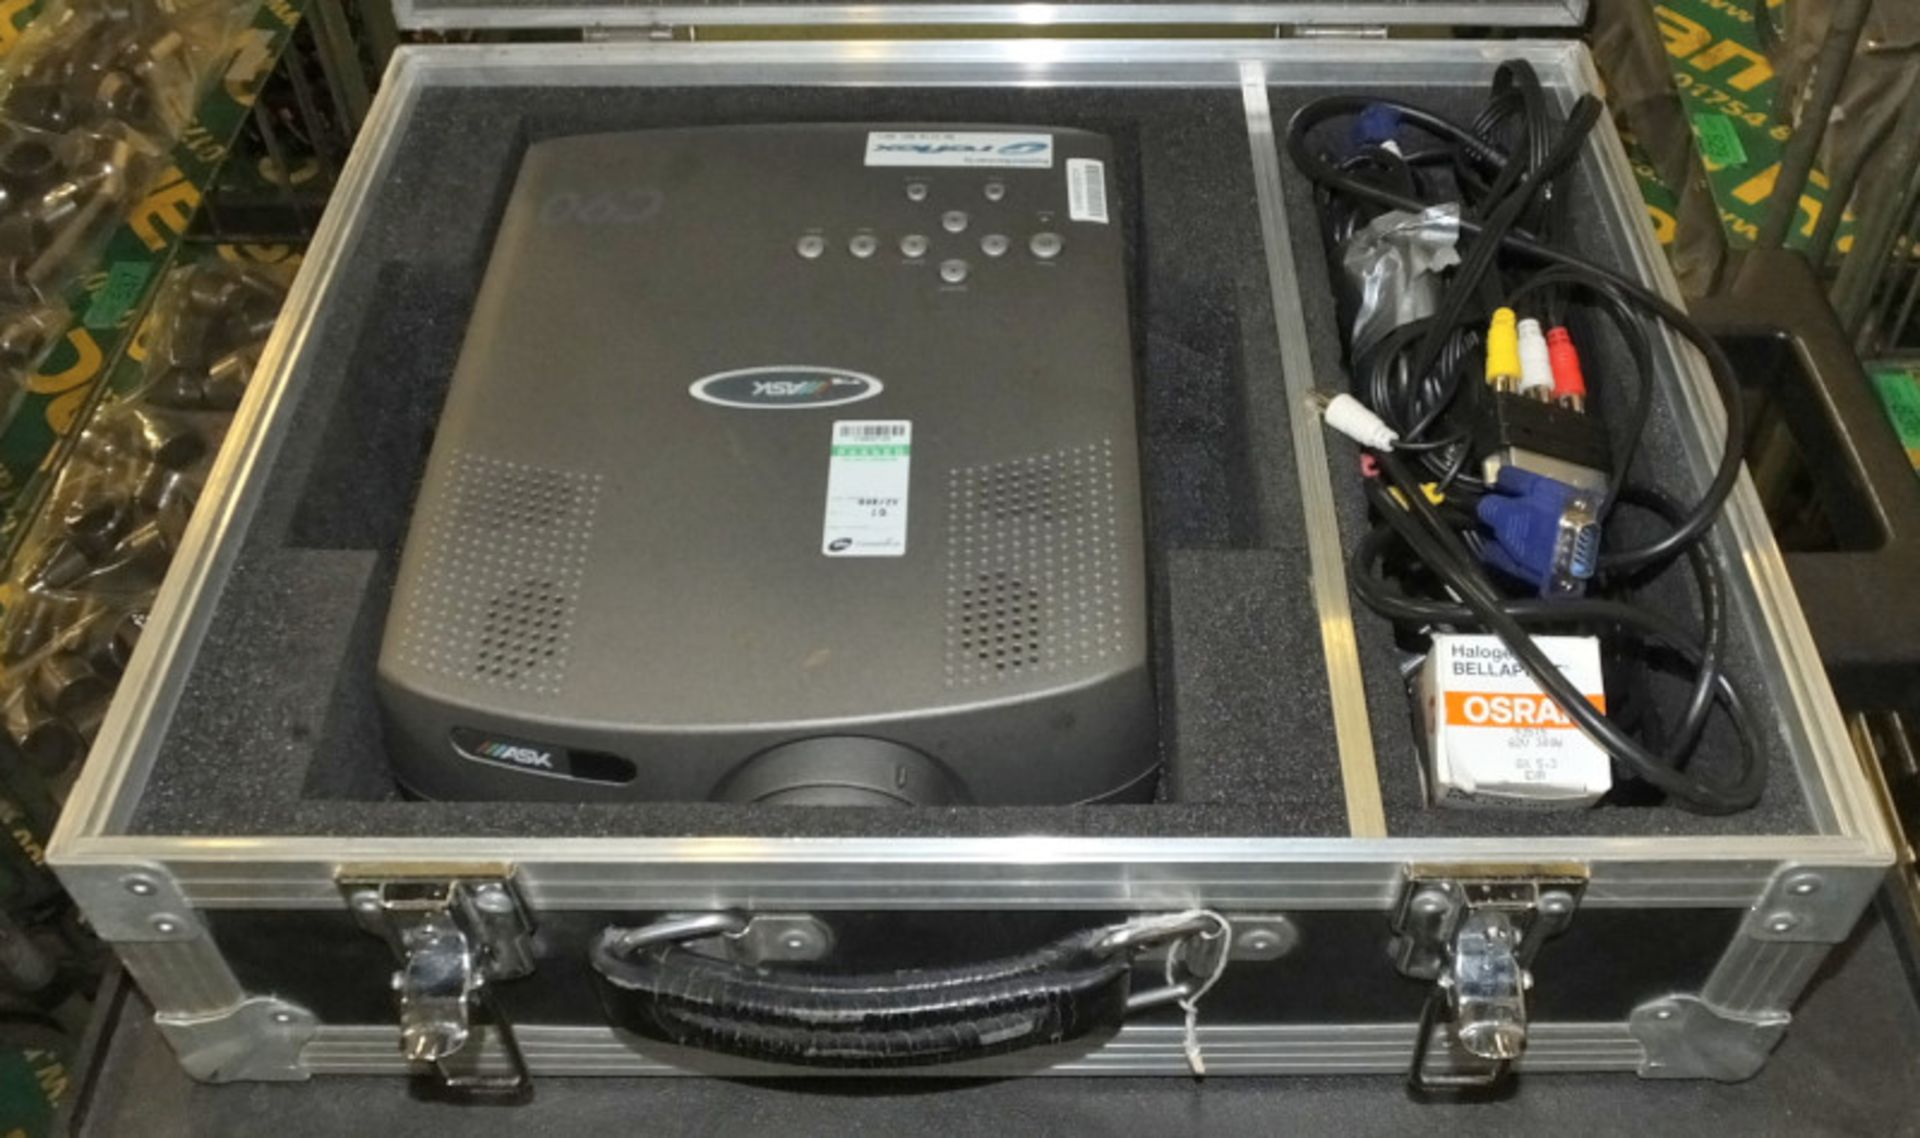 ASK C90 DVI Projector In A Case - Image 8 of 9